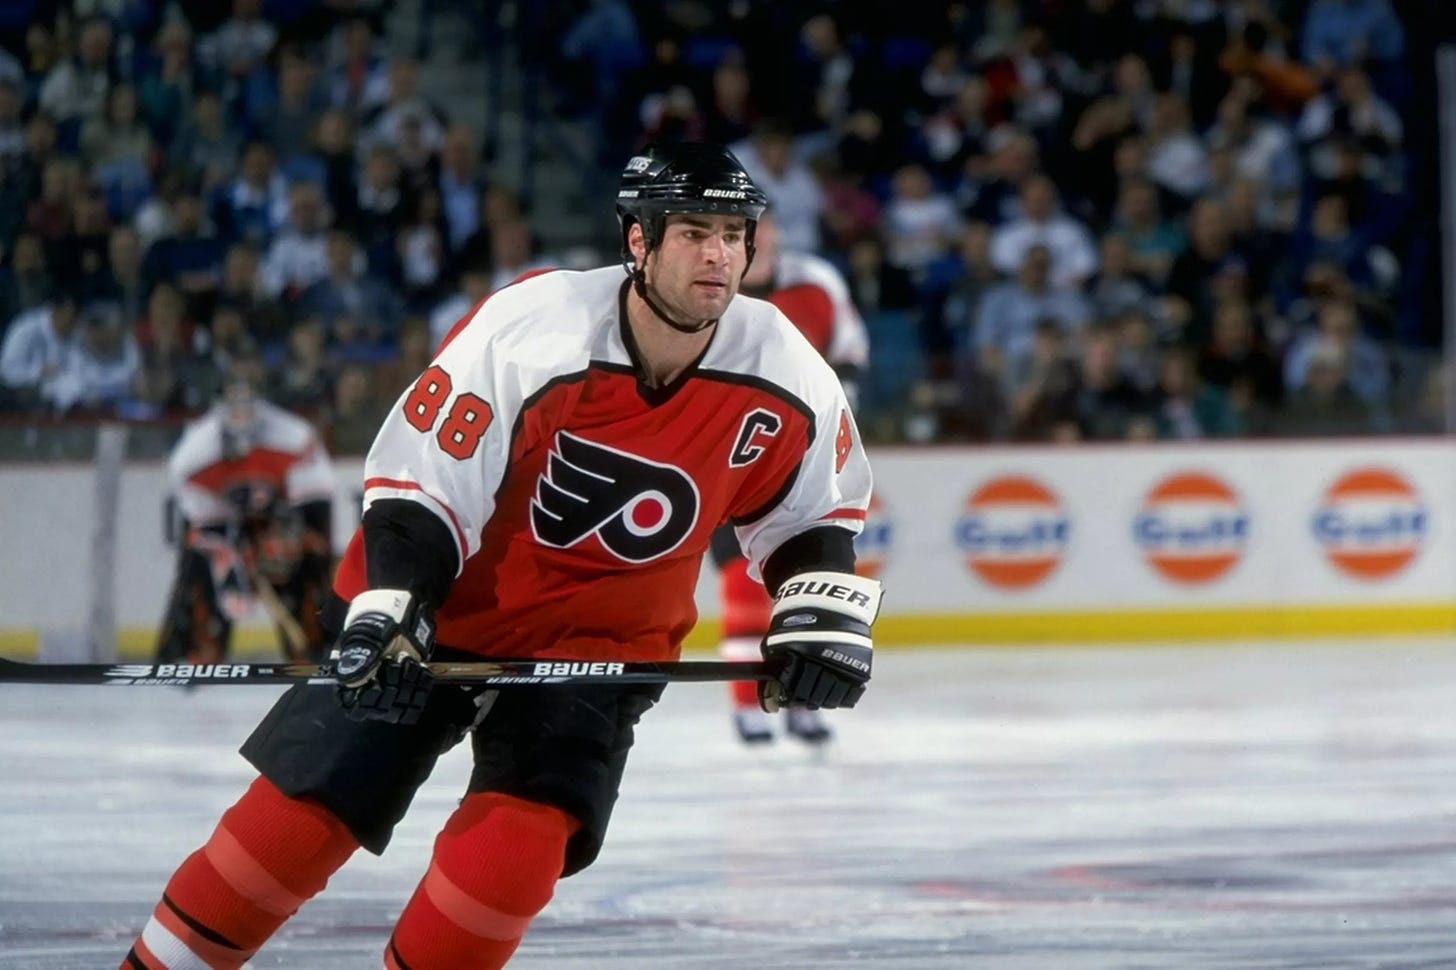 Eric Lindros' number 88 to be retired by Philadelphia Flyers